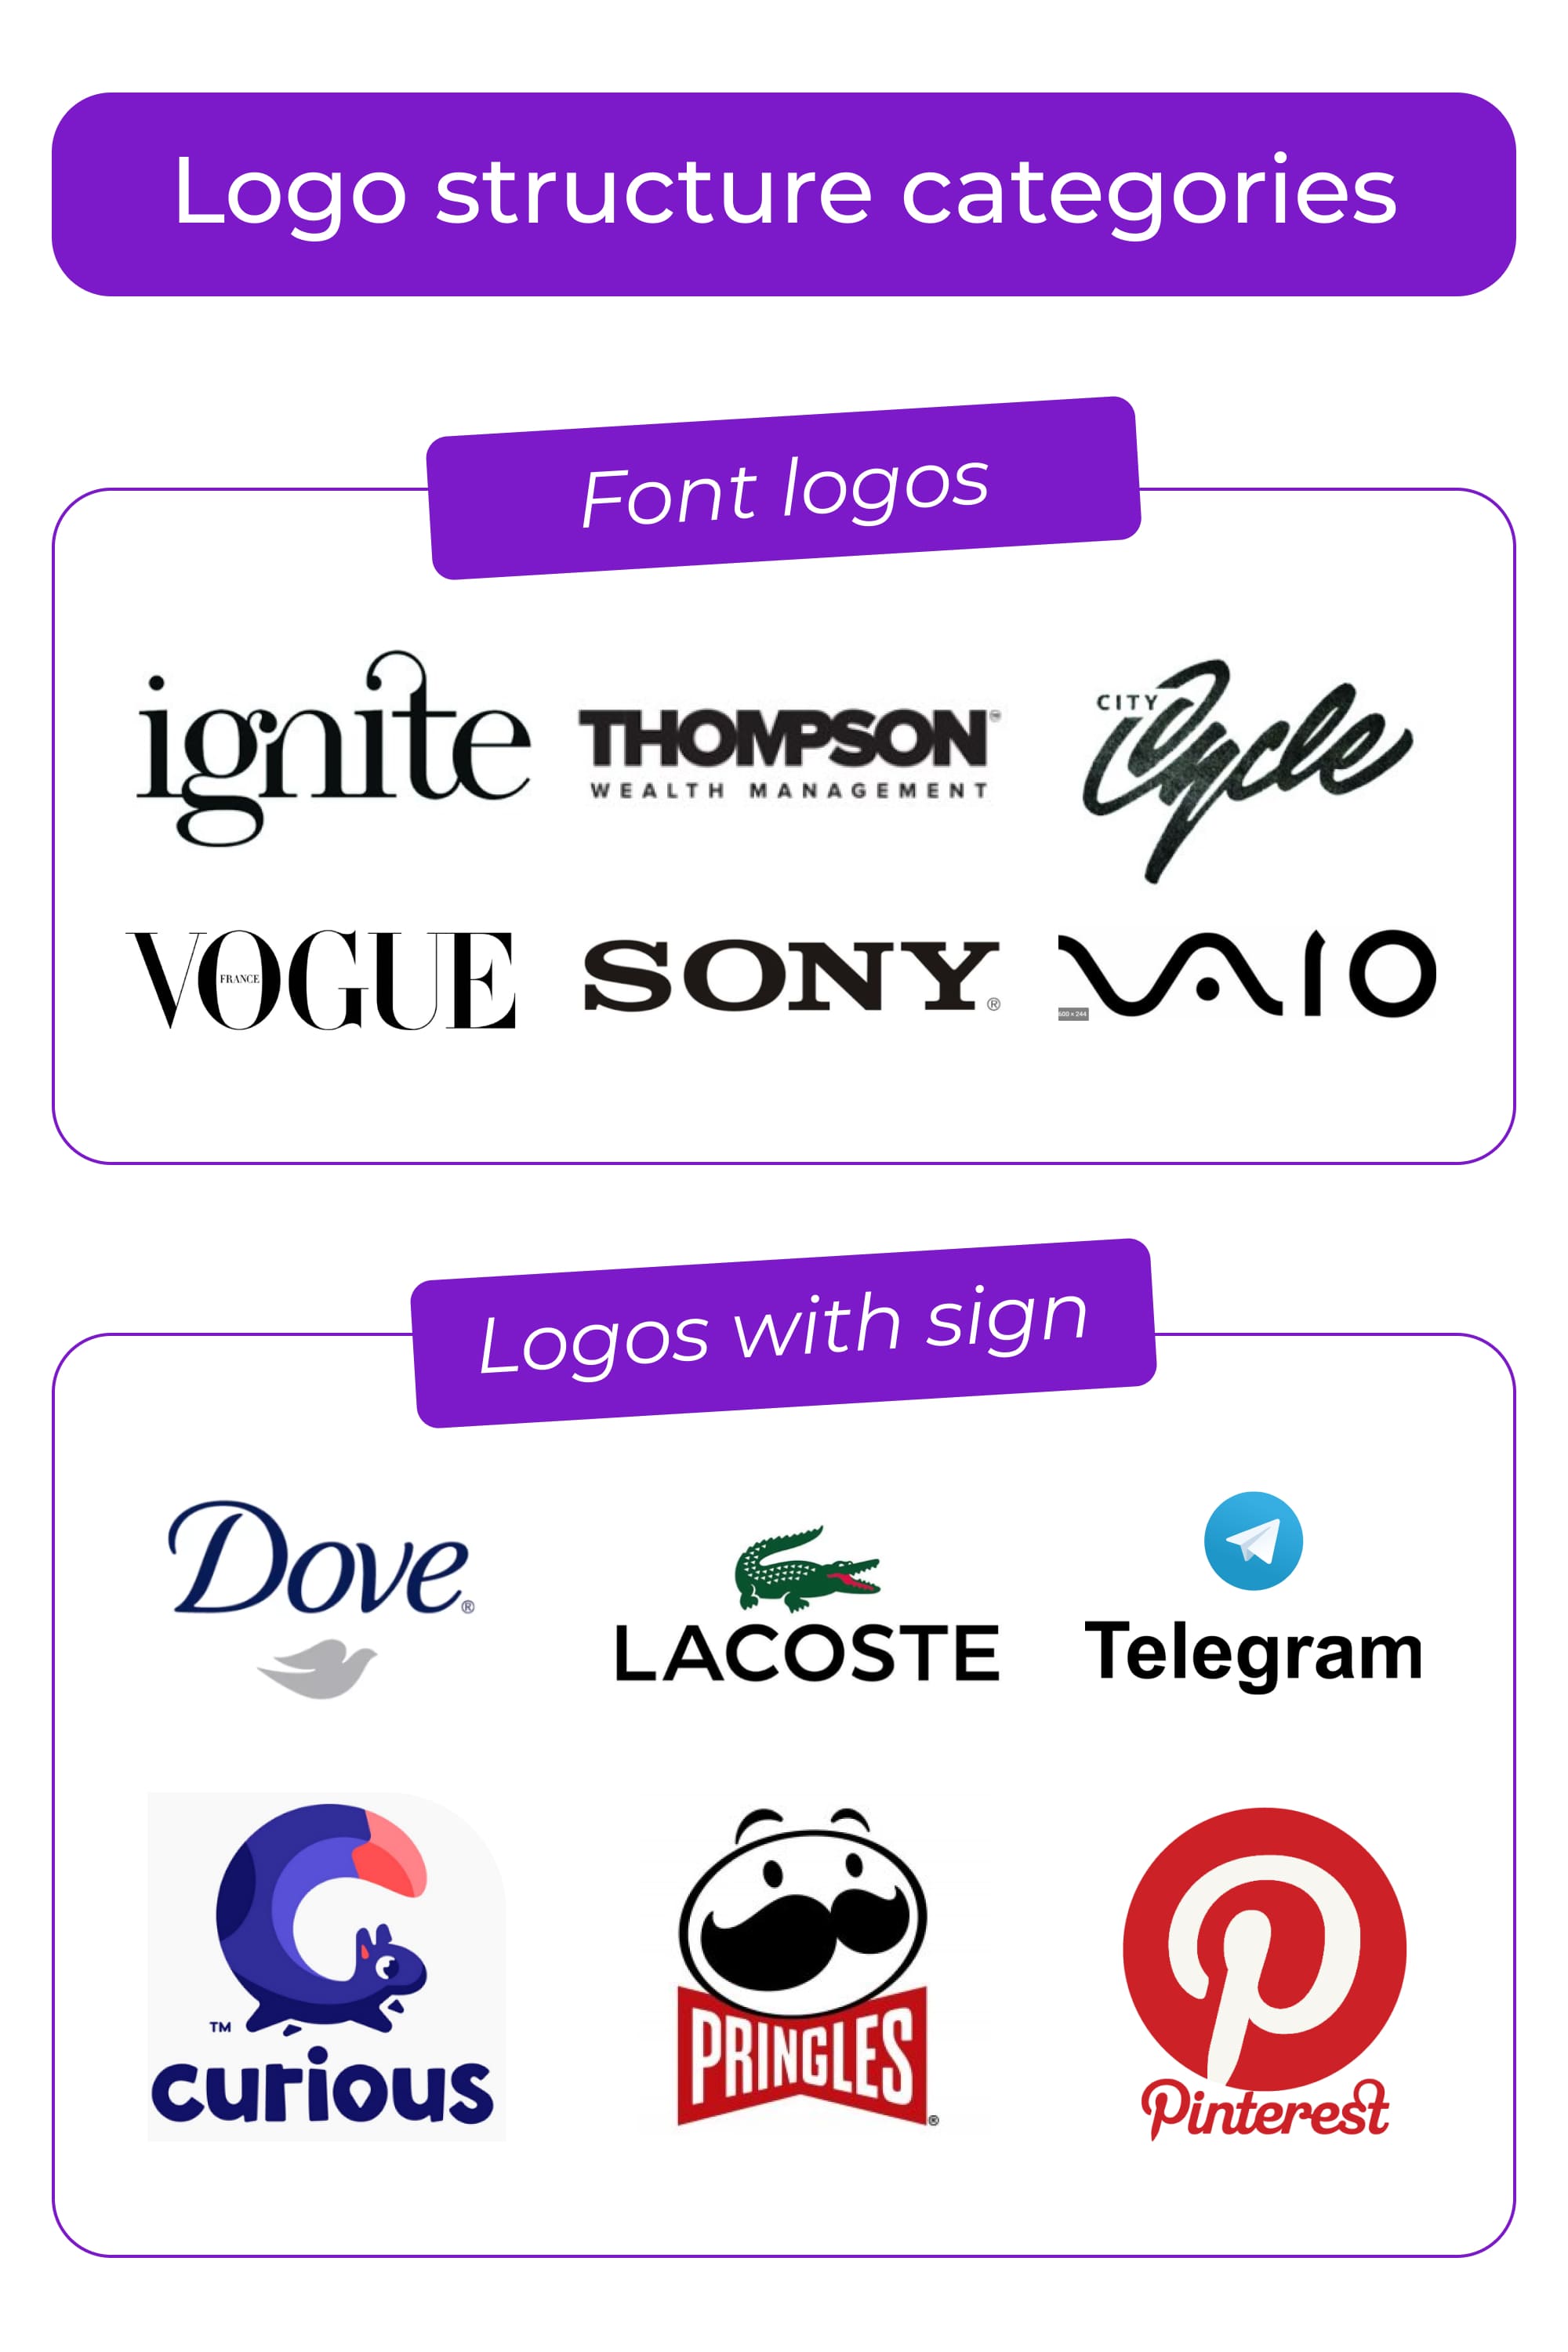 Collage with logo structure categories